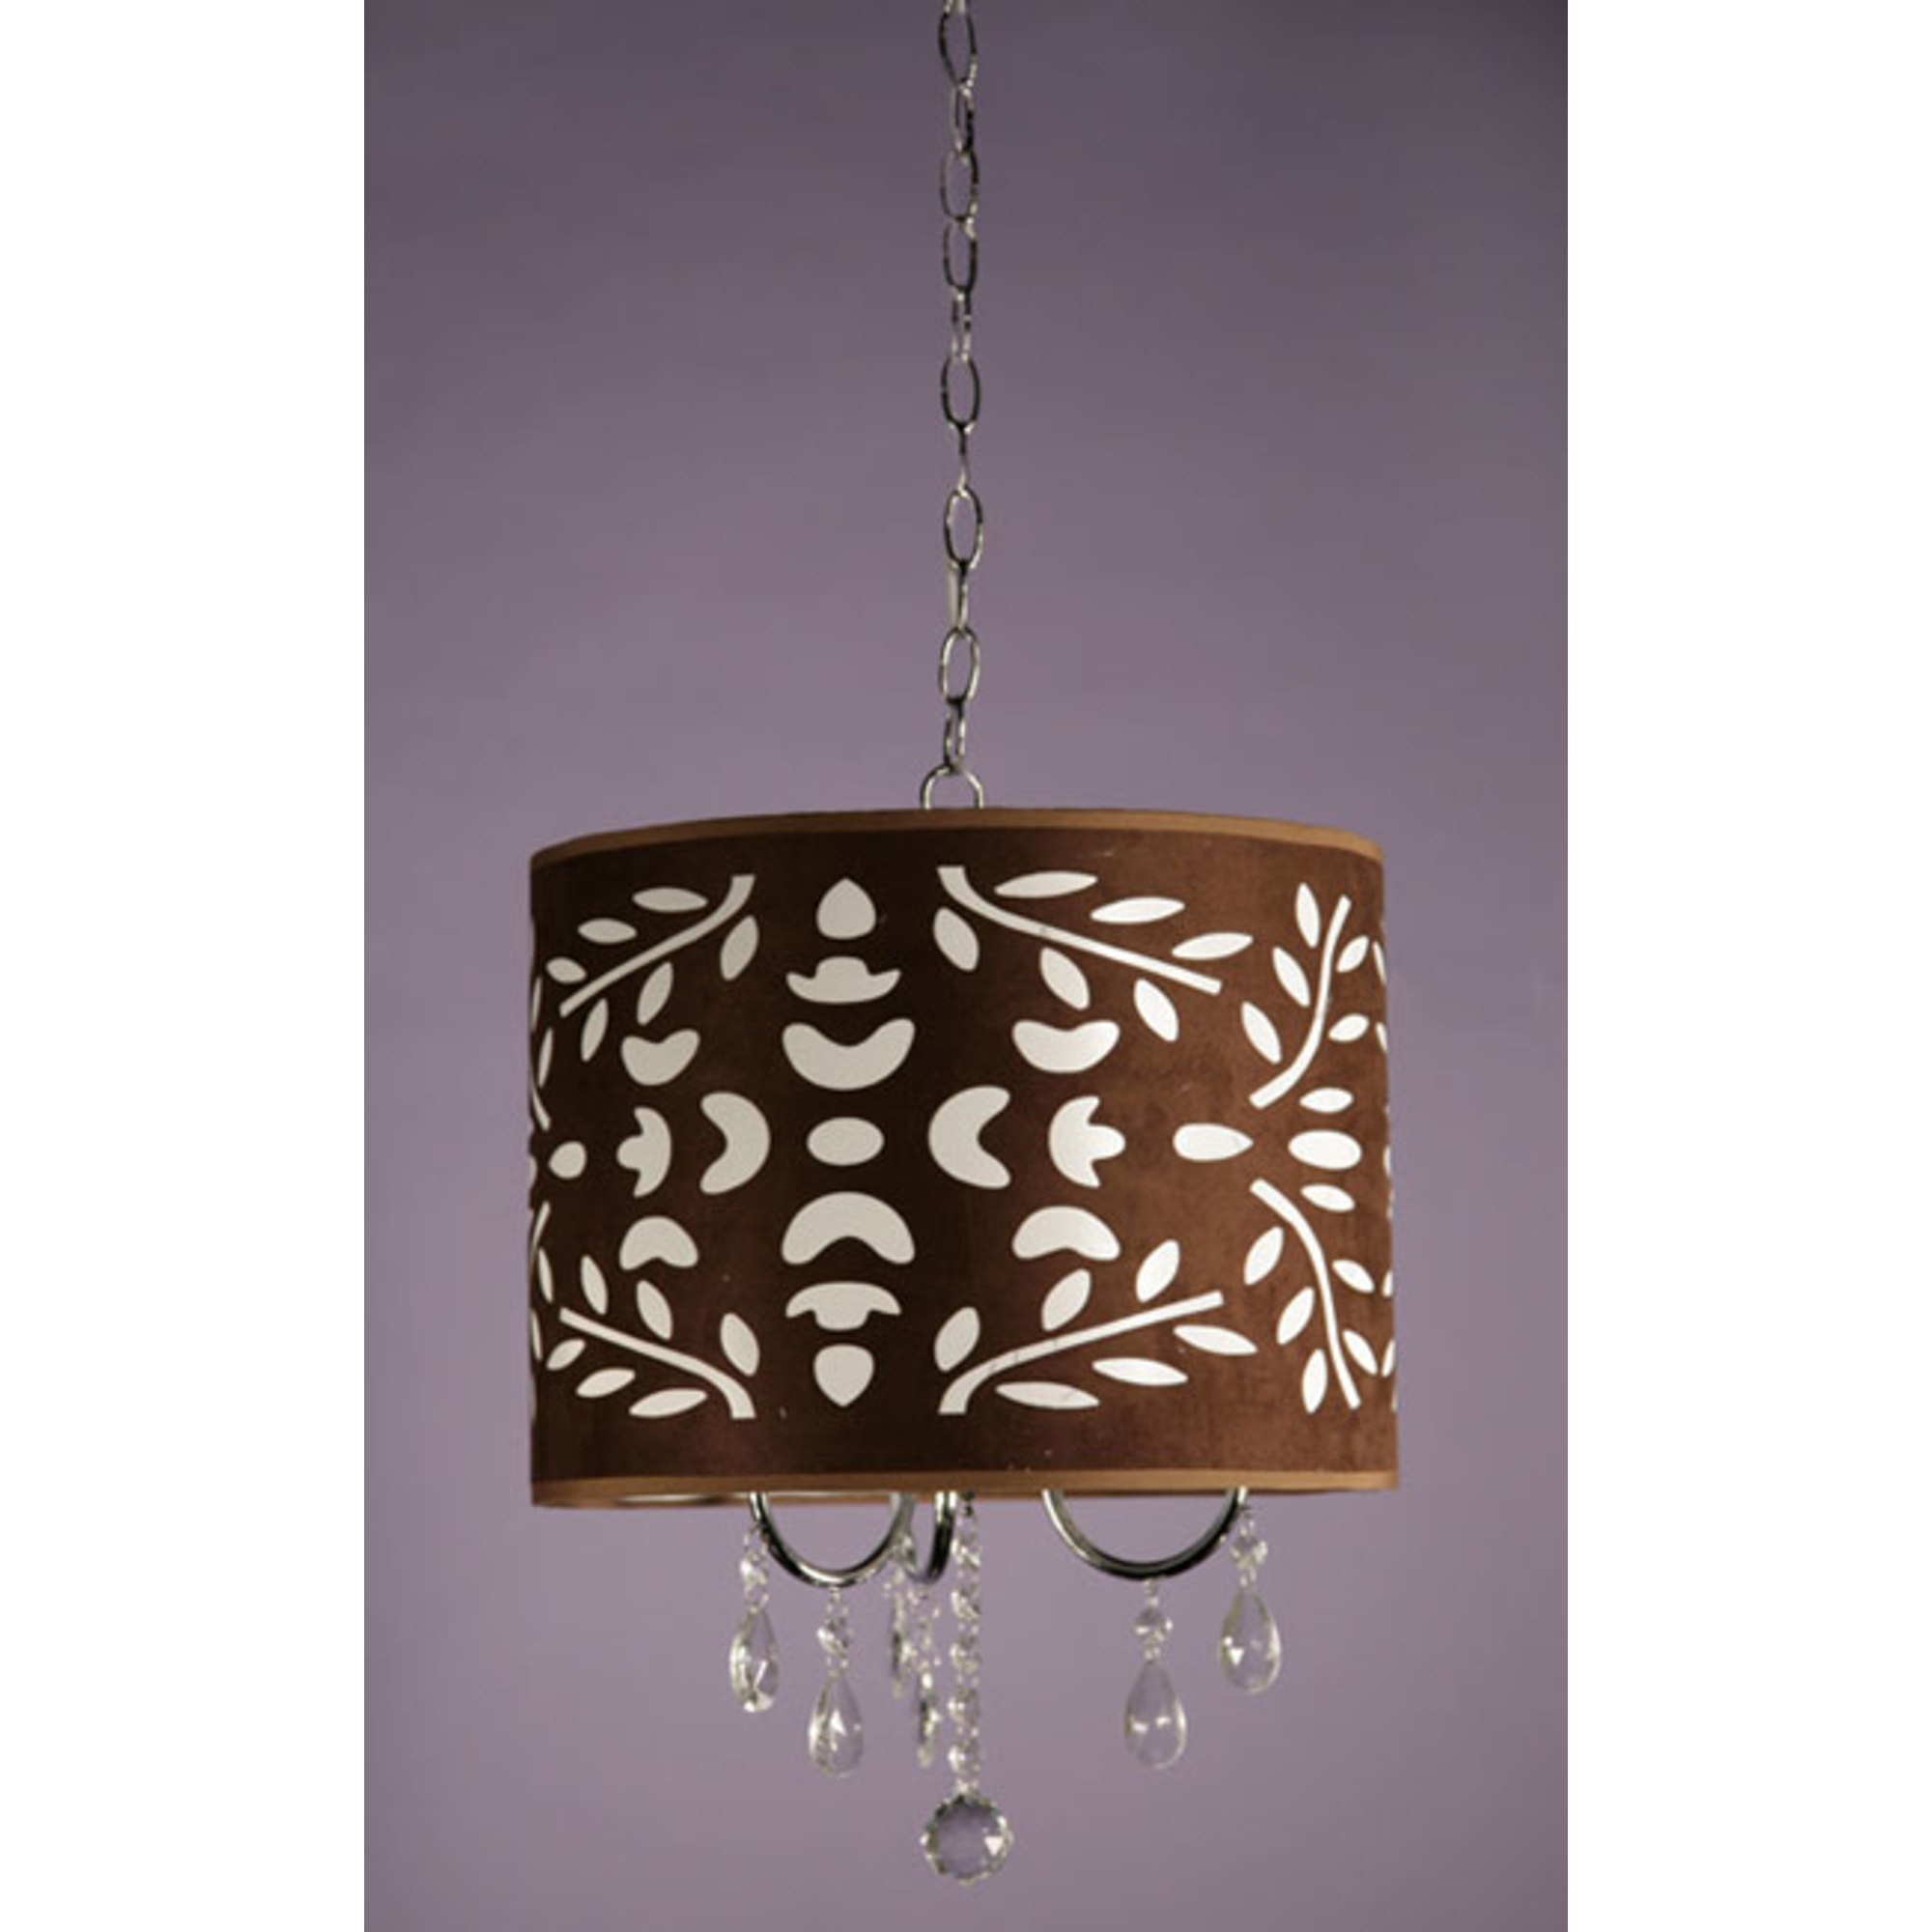 Filigree Shade Ceiling Light - Chrome and Brown